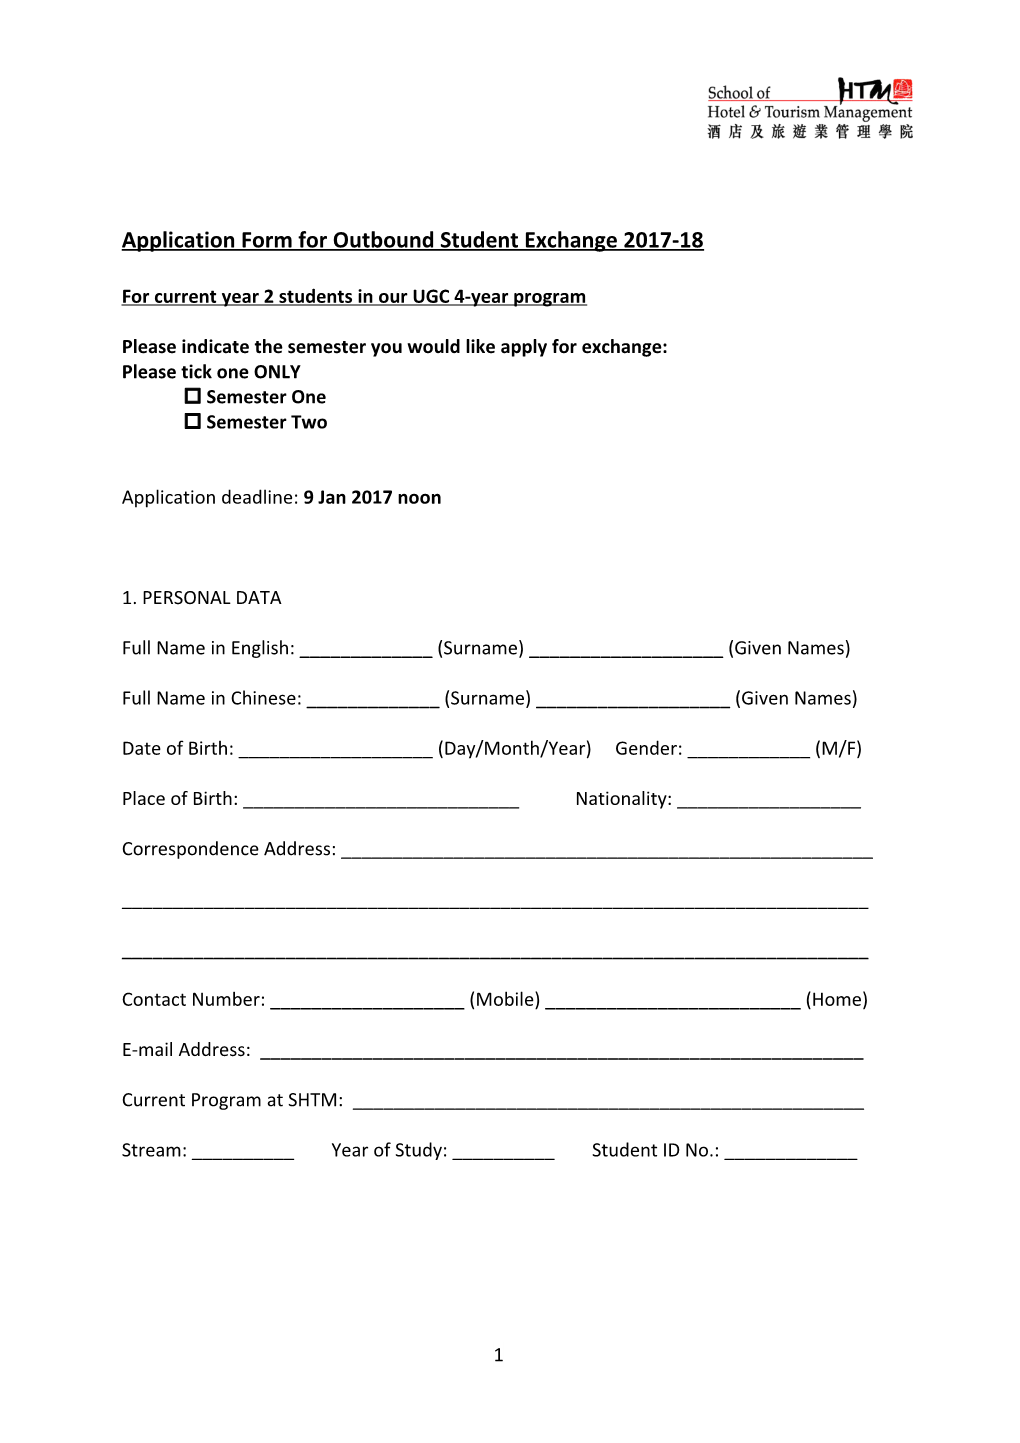 Application Form for Outbound Student Exchange 2017-18